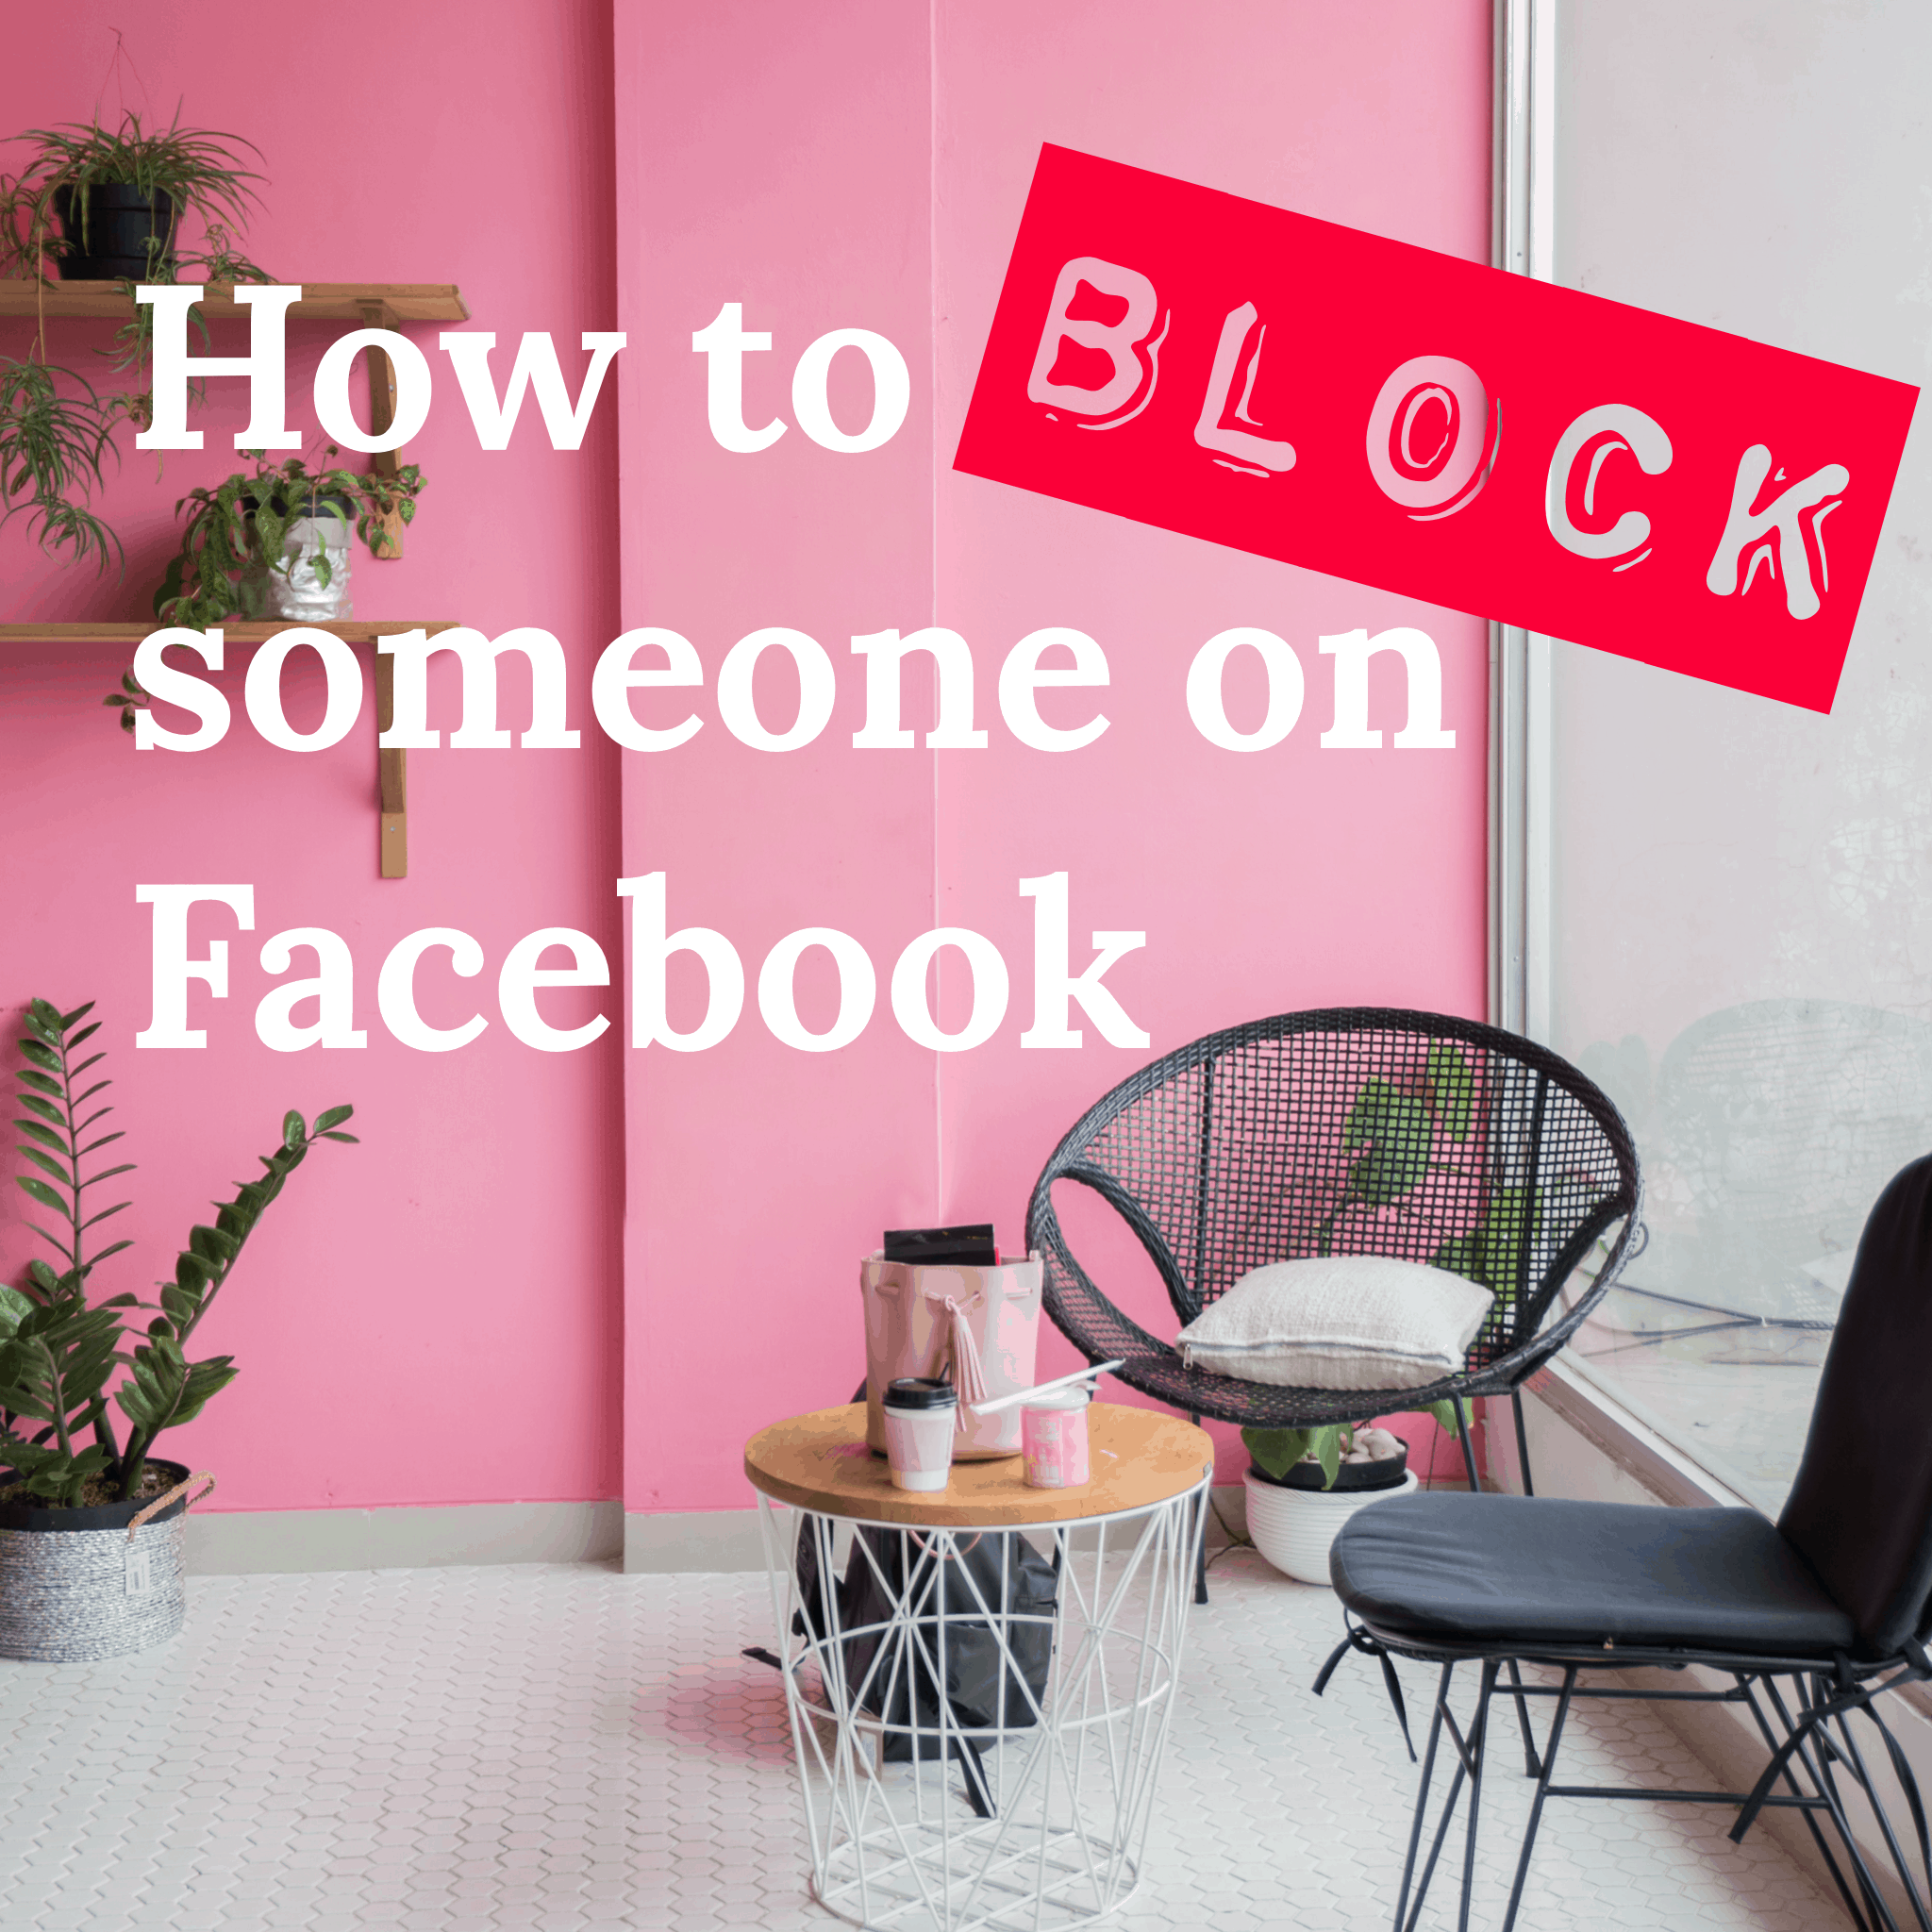 how to block someone on Facebook